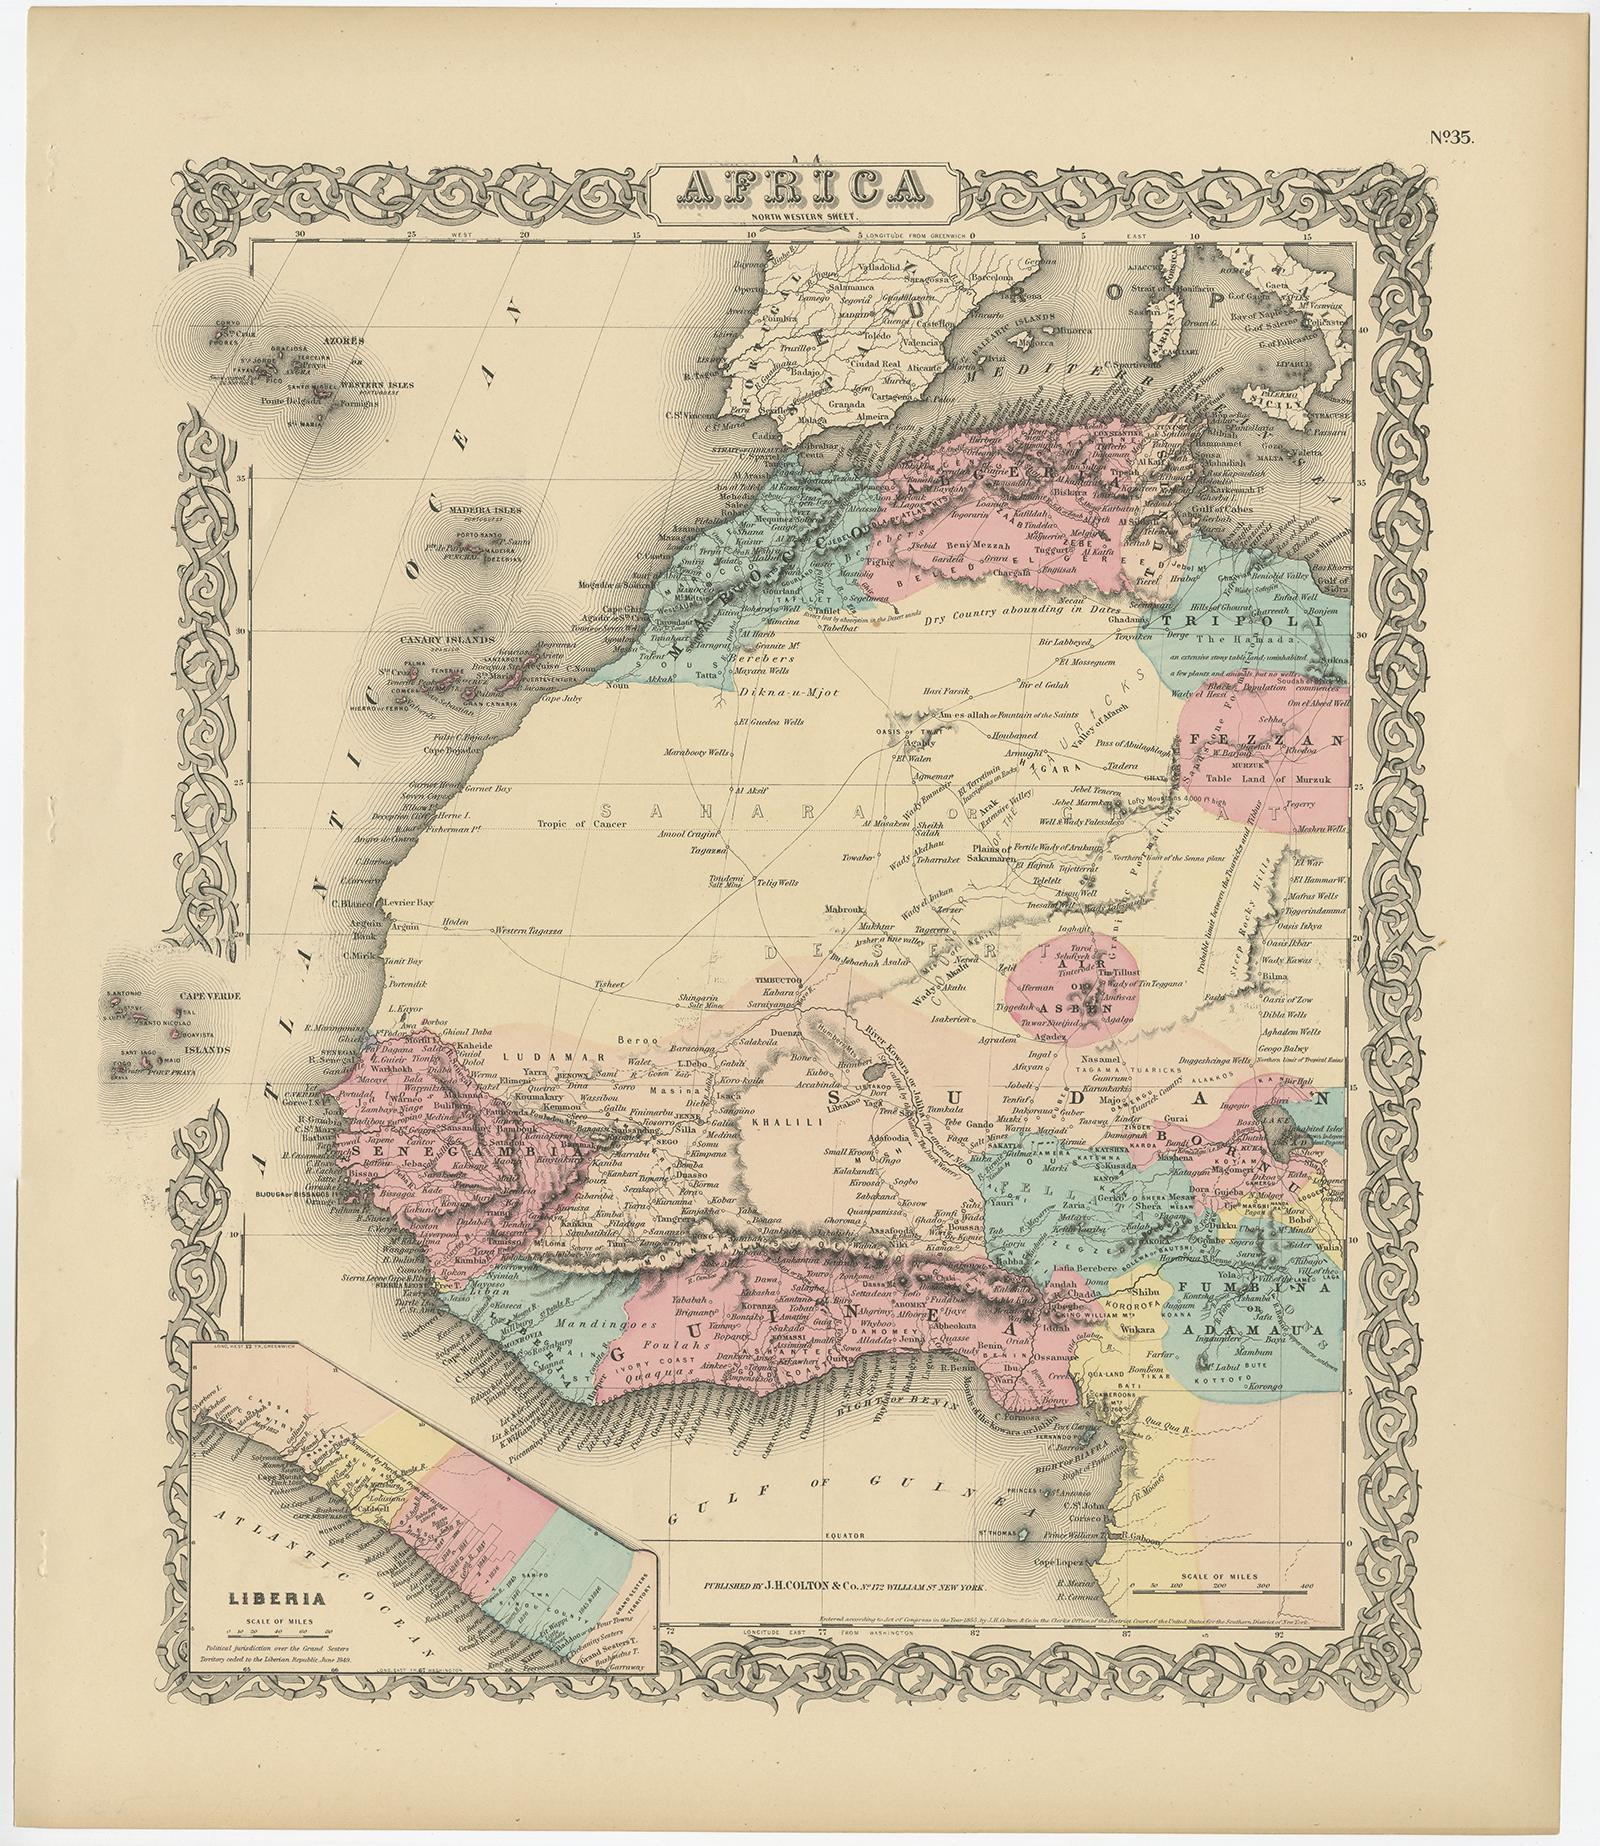 Set of three individual maps of Africa including 'North West Africa', 'North Eastern Africa' and 'Southern Africa'. All three maps are surrounded by Colton's typical spiral motif border. Colton names numerous African tribes and nations throughout.